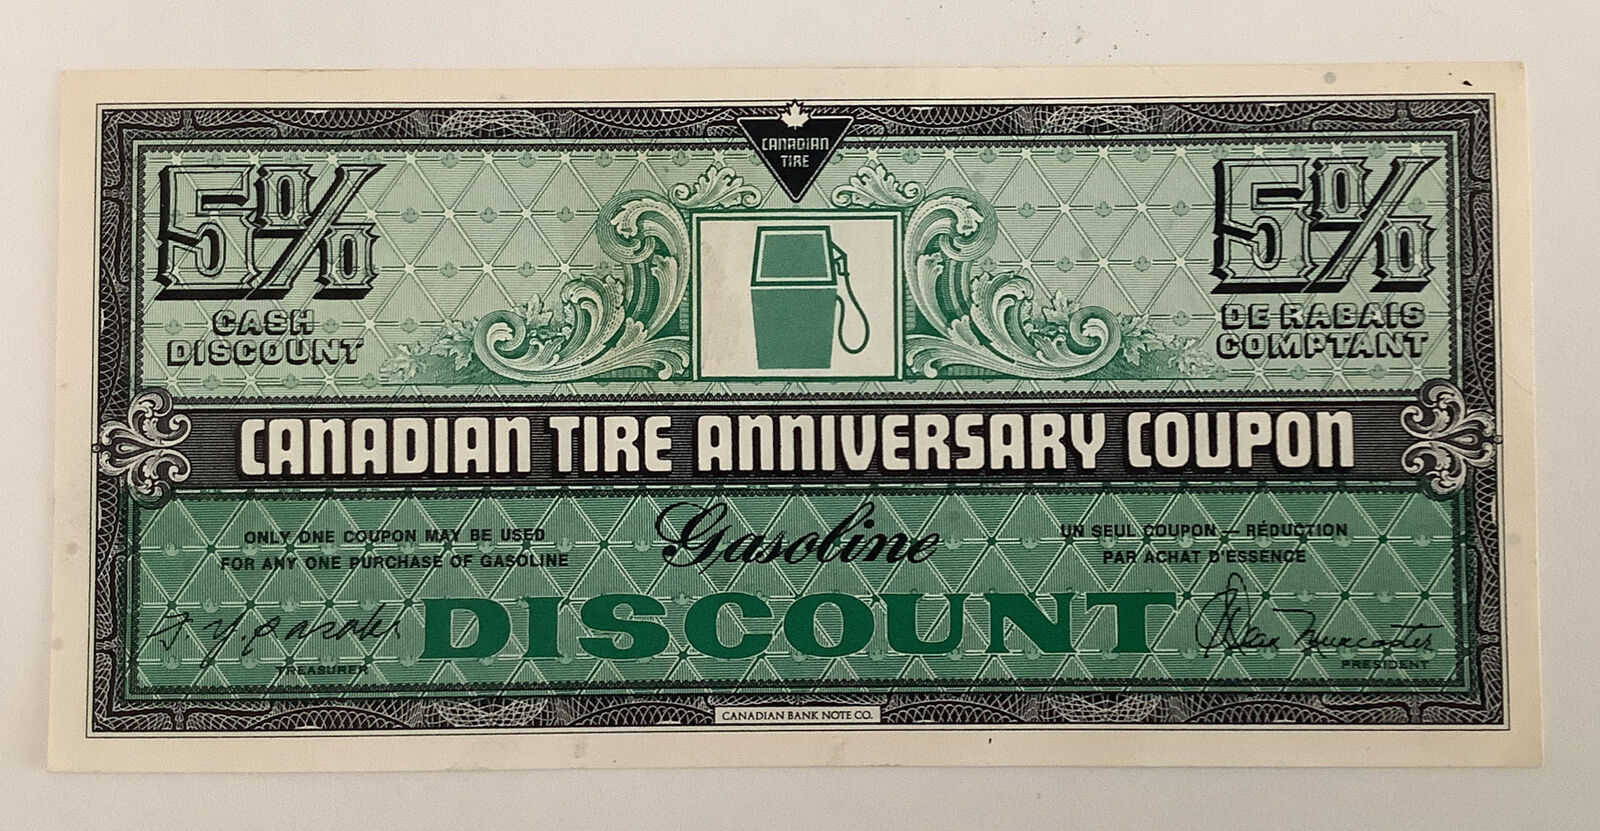 5% Cash 00674263 Discount Ctc Canadian Tire Anniversary Coupons